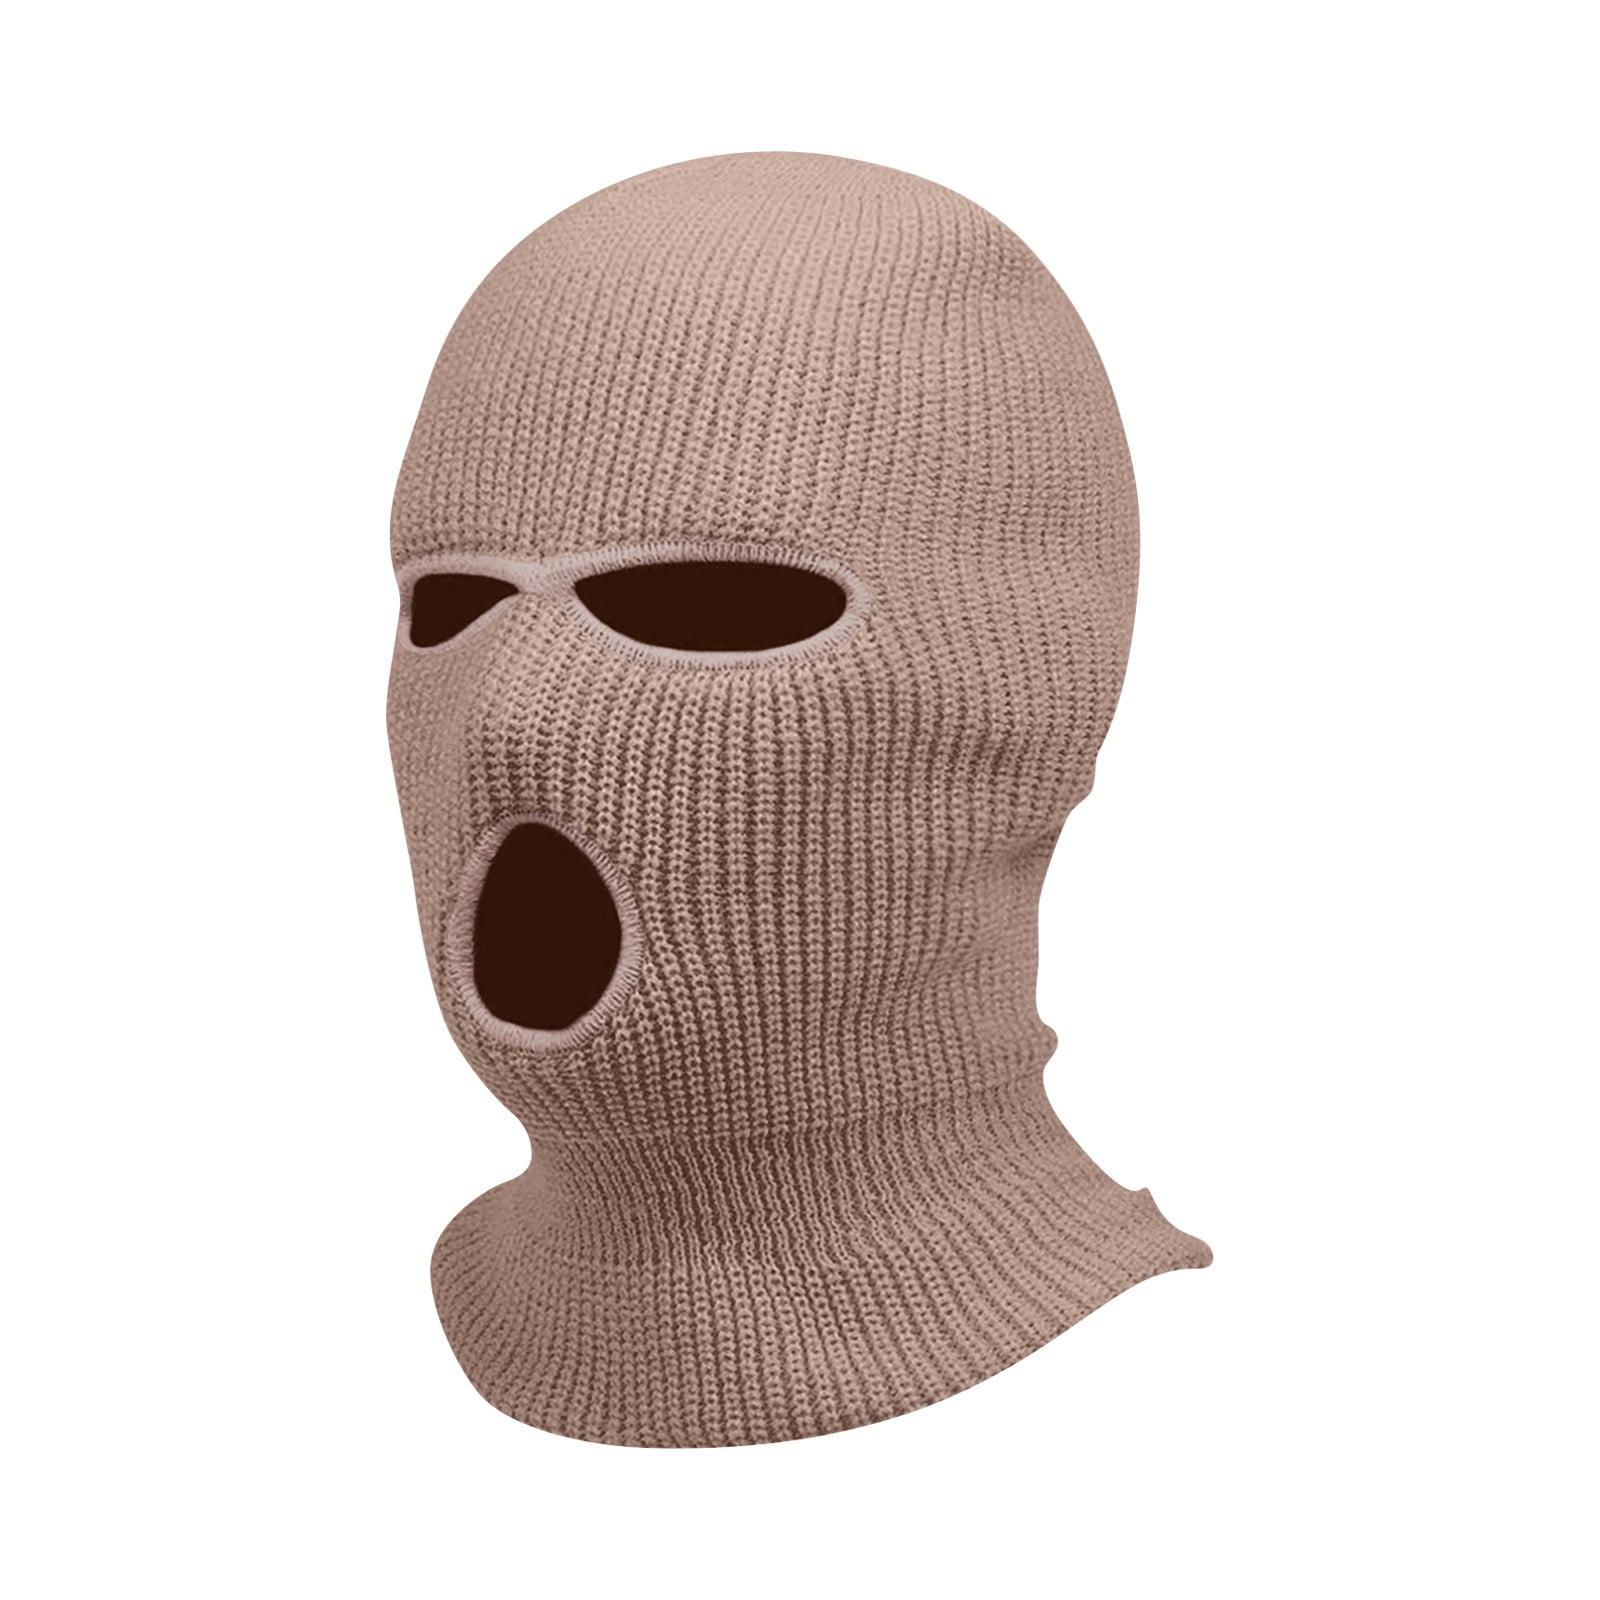 Mens Balaclava SAS Army Hat 3 Hole or Open Face Knitted Winter Hat